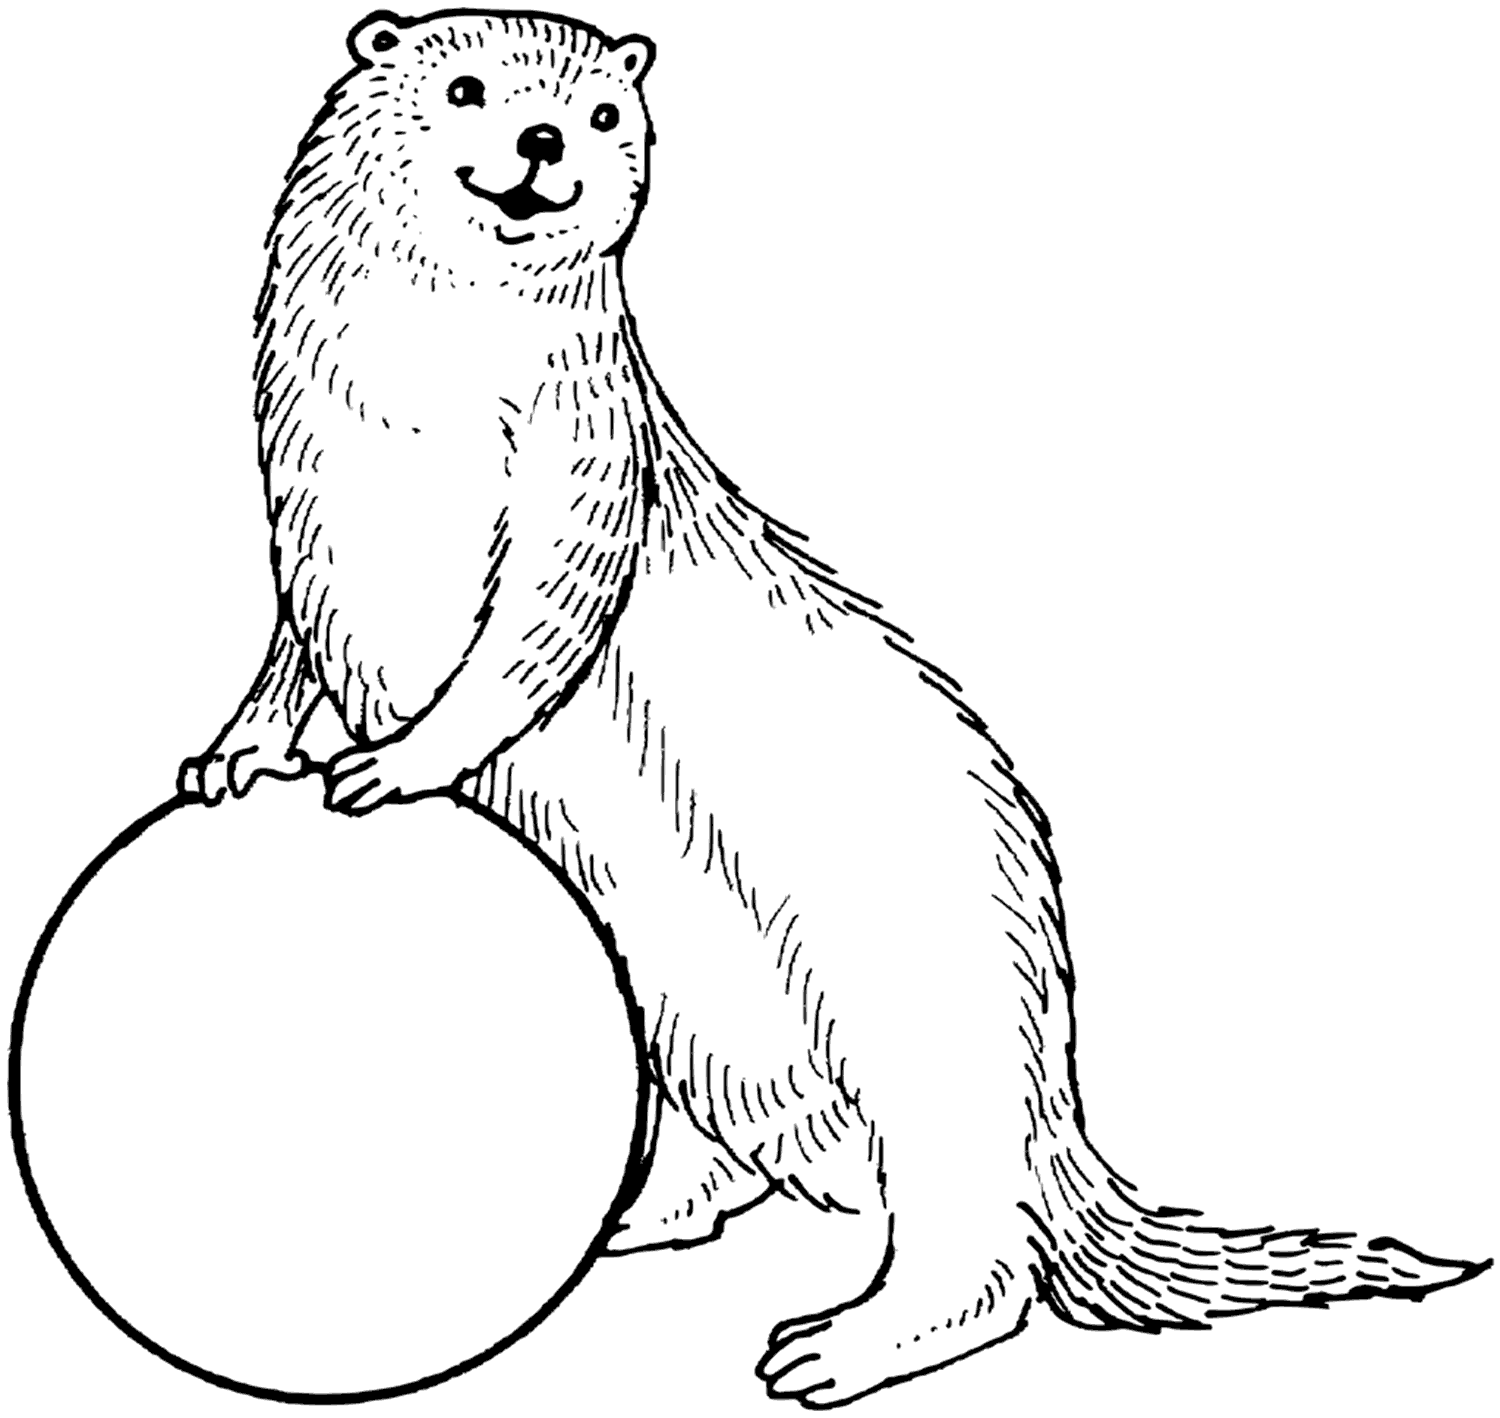 Otter Coloring Pages - Best Coloring Pages For Kids